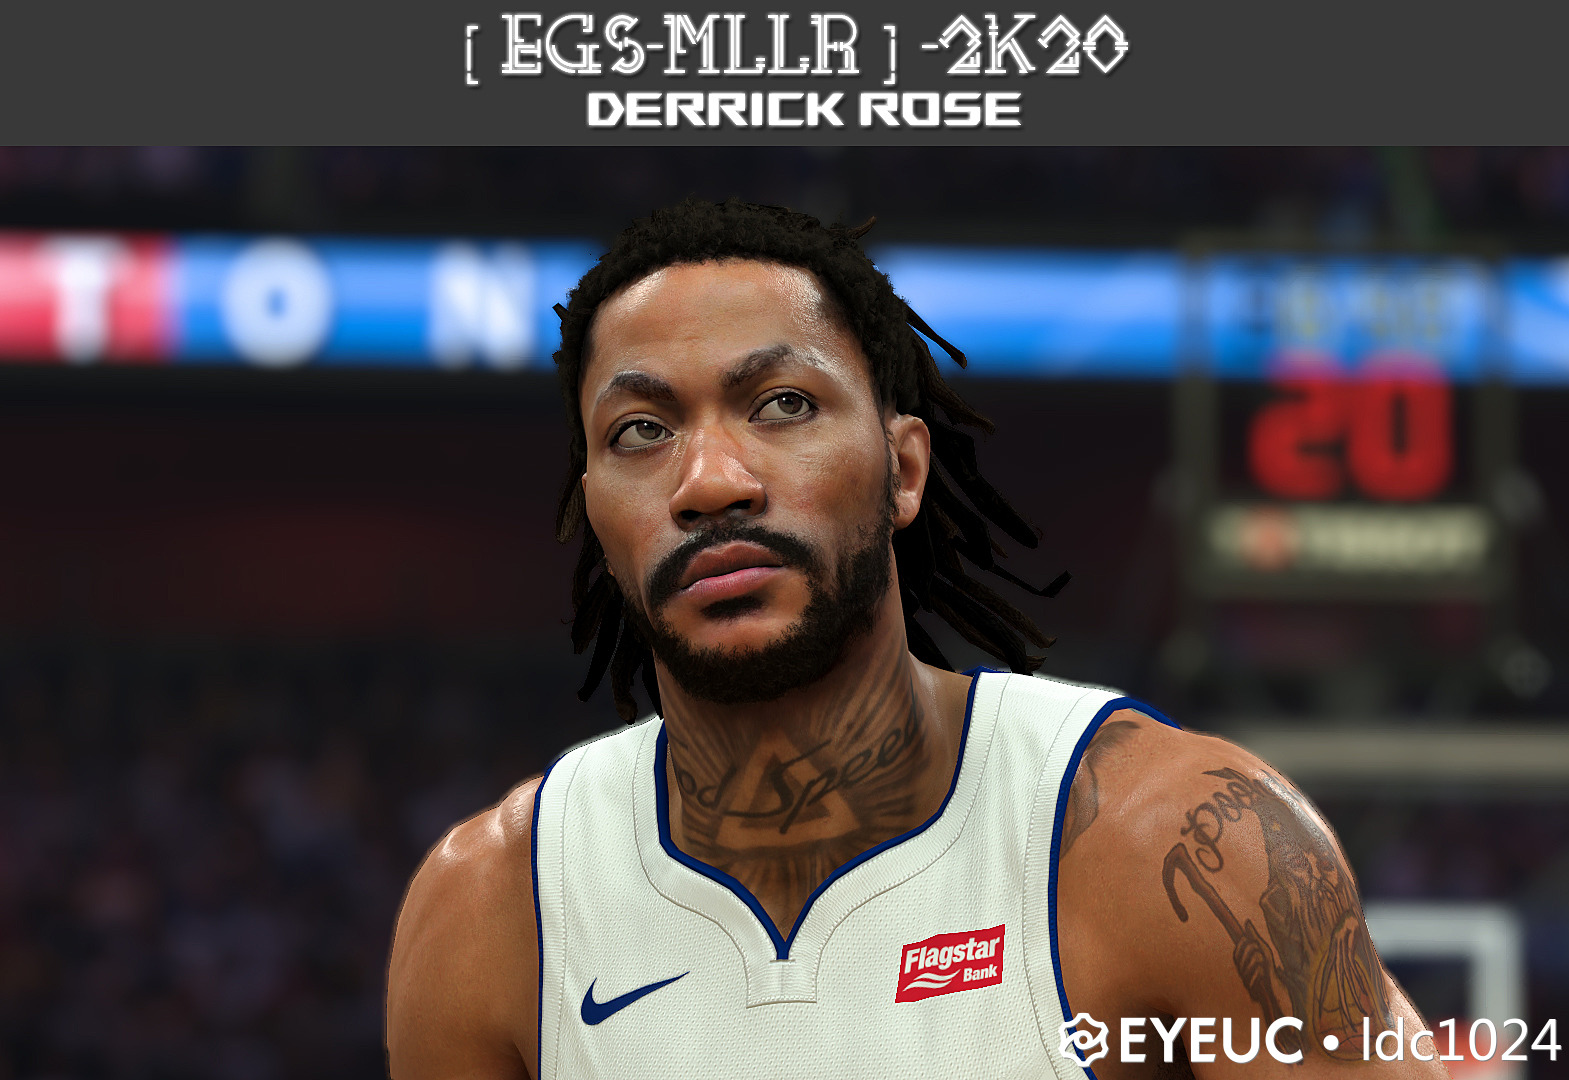 Derrick Rose HD Face and Body Model by EGS-MLLR [FOR 2K20] - NBA 2K Updates, Roster ...